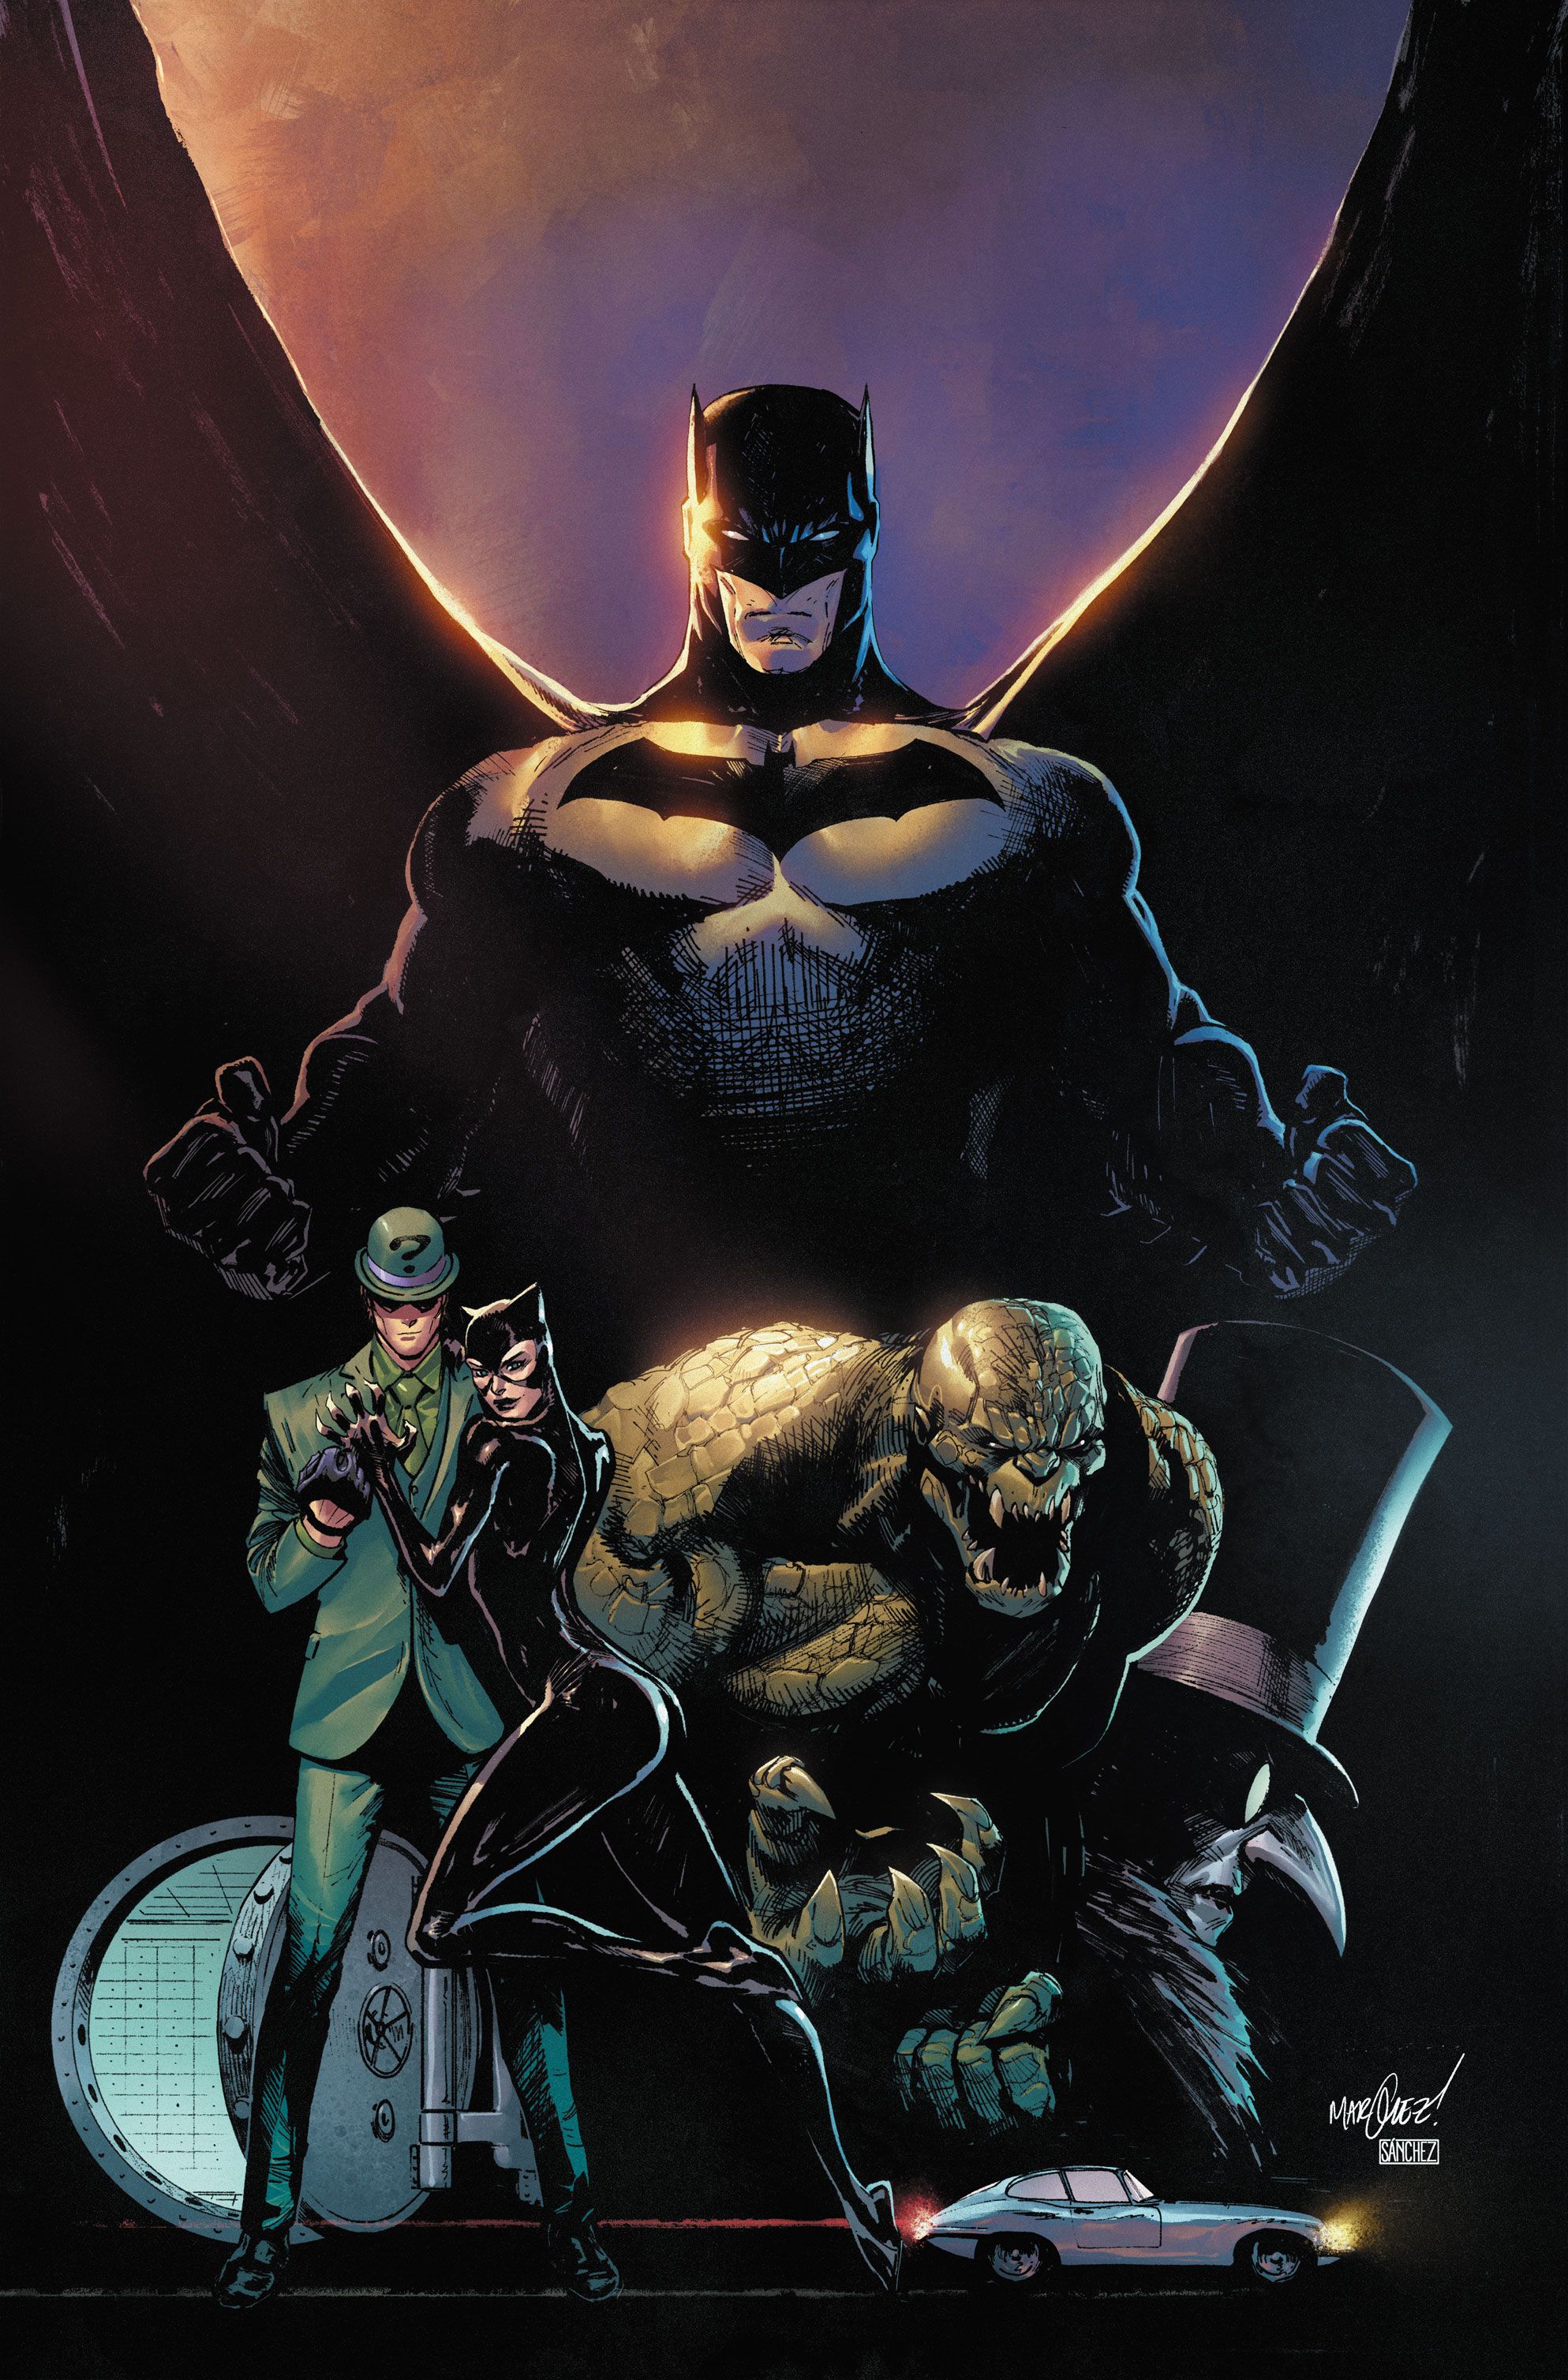 Cover for Batman: Killing Time #1 by Tom King, David Marquez and Alejandro Sanchez.